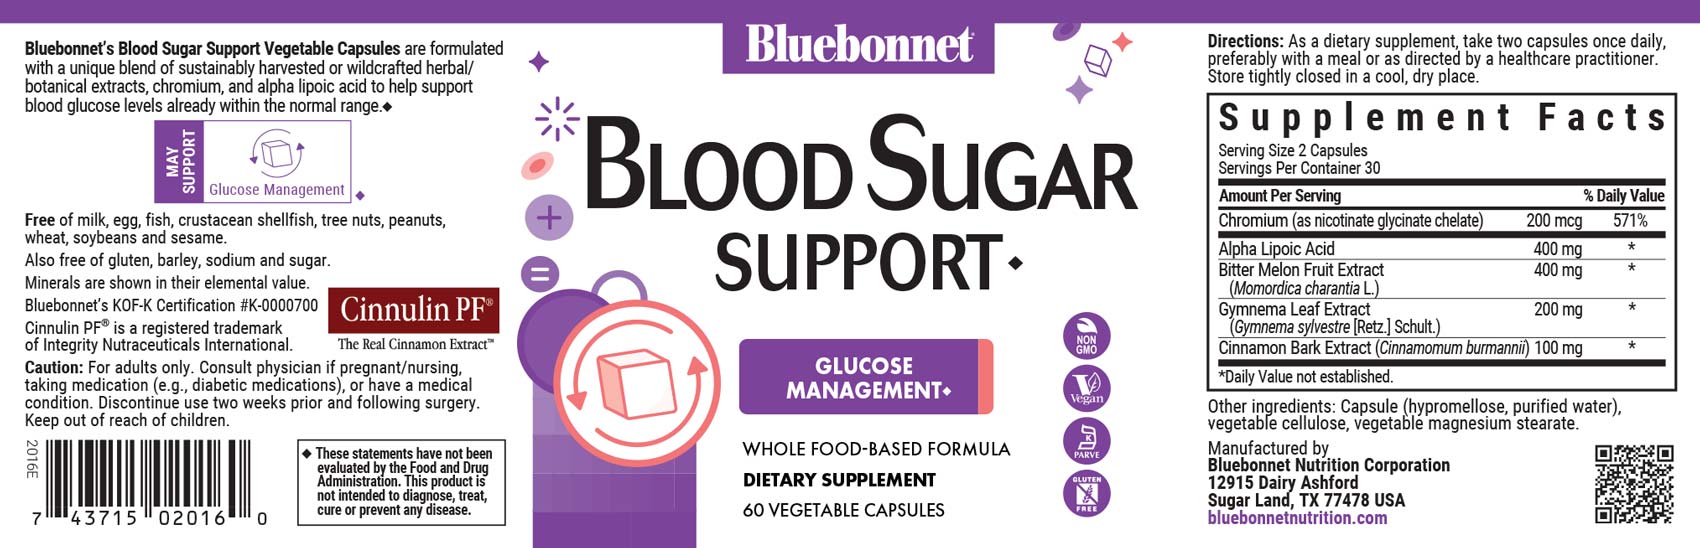 Bluebonnet's Targeted Choice Blood Sugar Support. 60 vegetable capsules